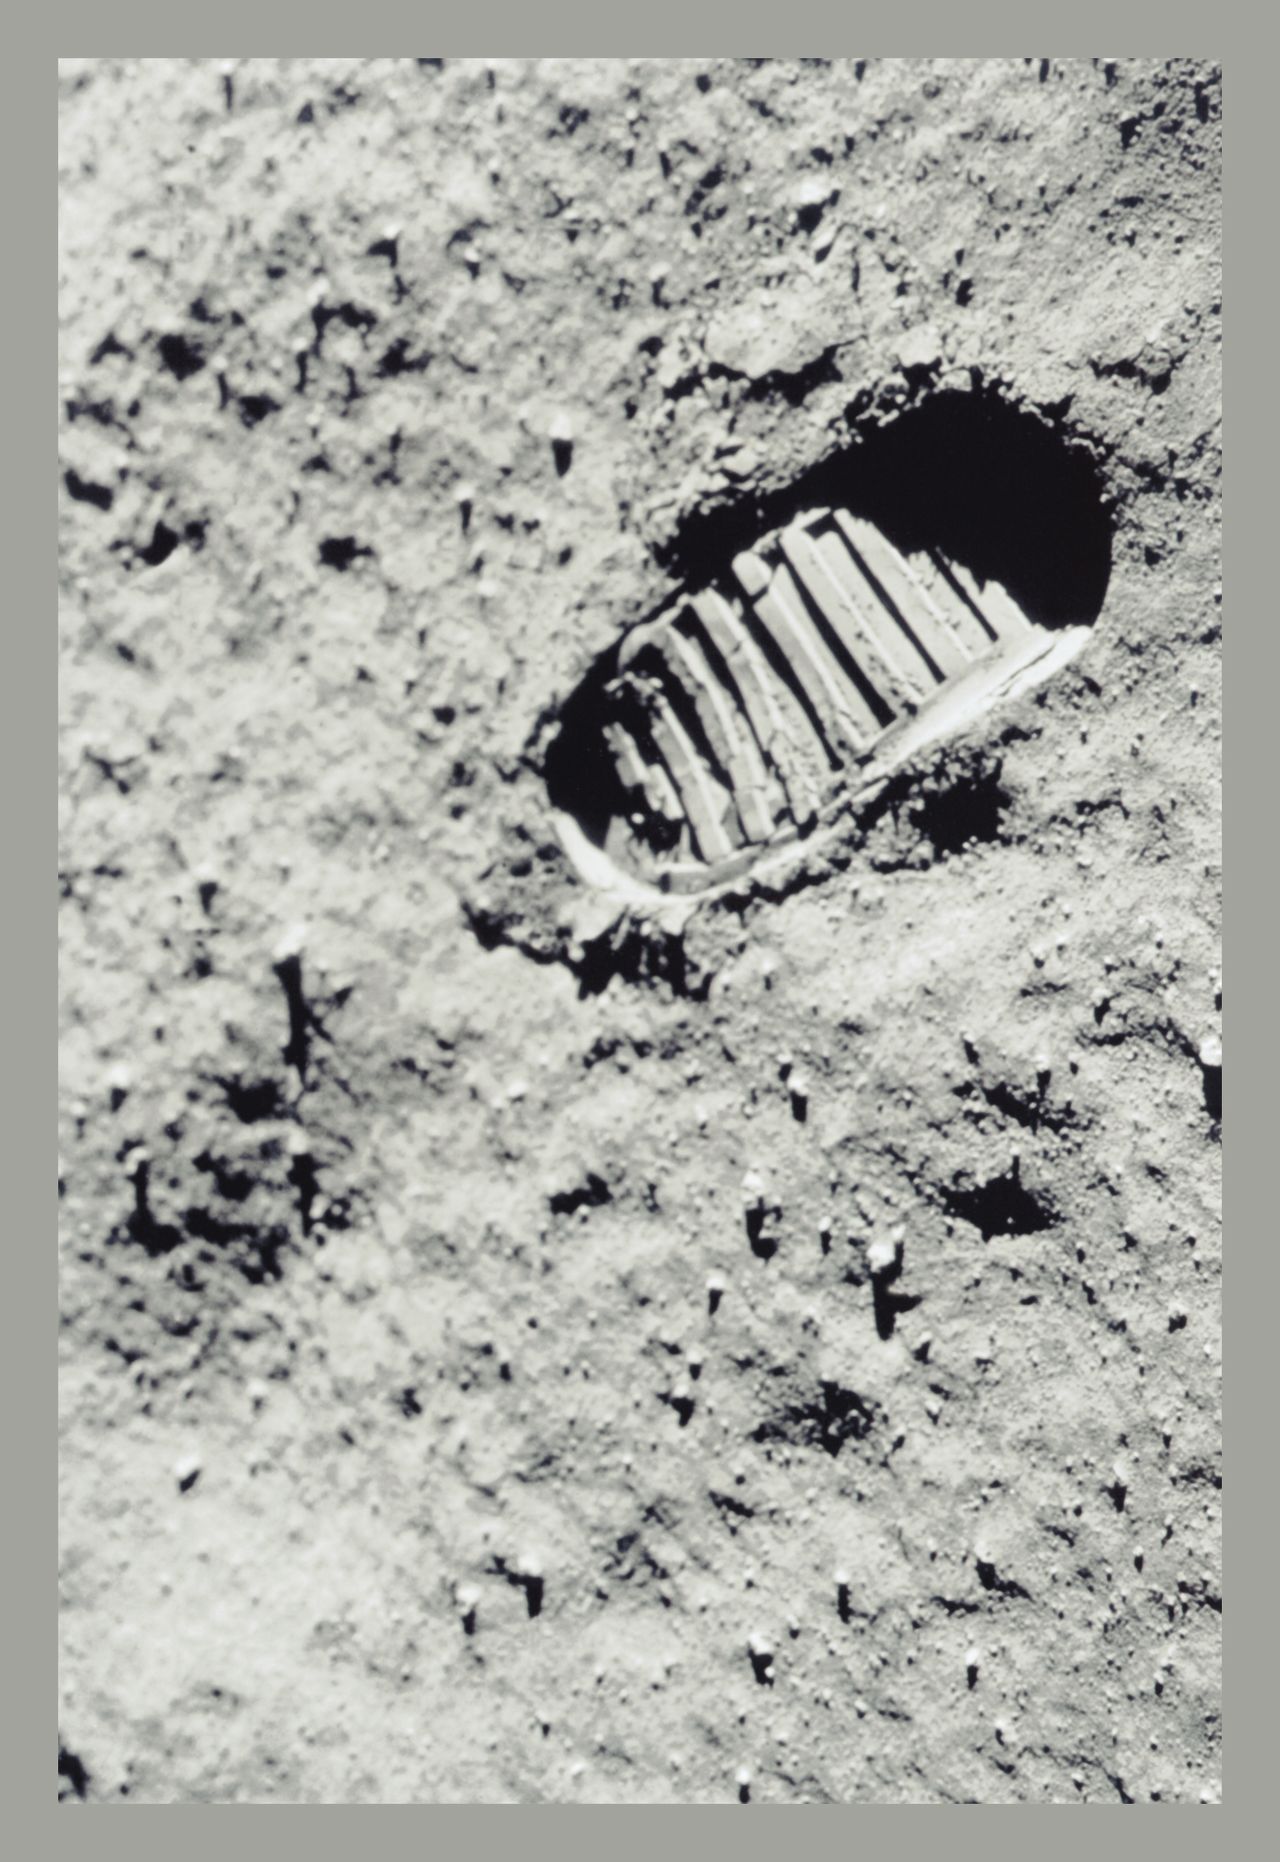 Neil Armstrong (whose footprint is shown on the moon's surface) had to override the Eagle lunar module's autopilot in order to prevent the craft from landing on the slope of a crater.